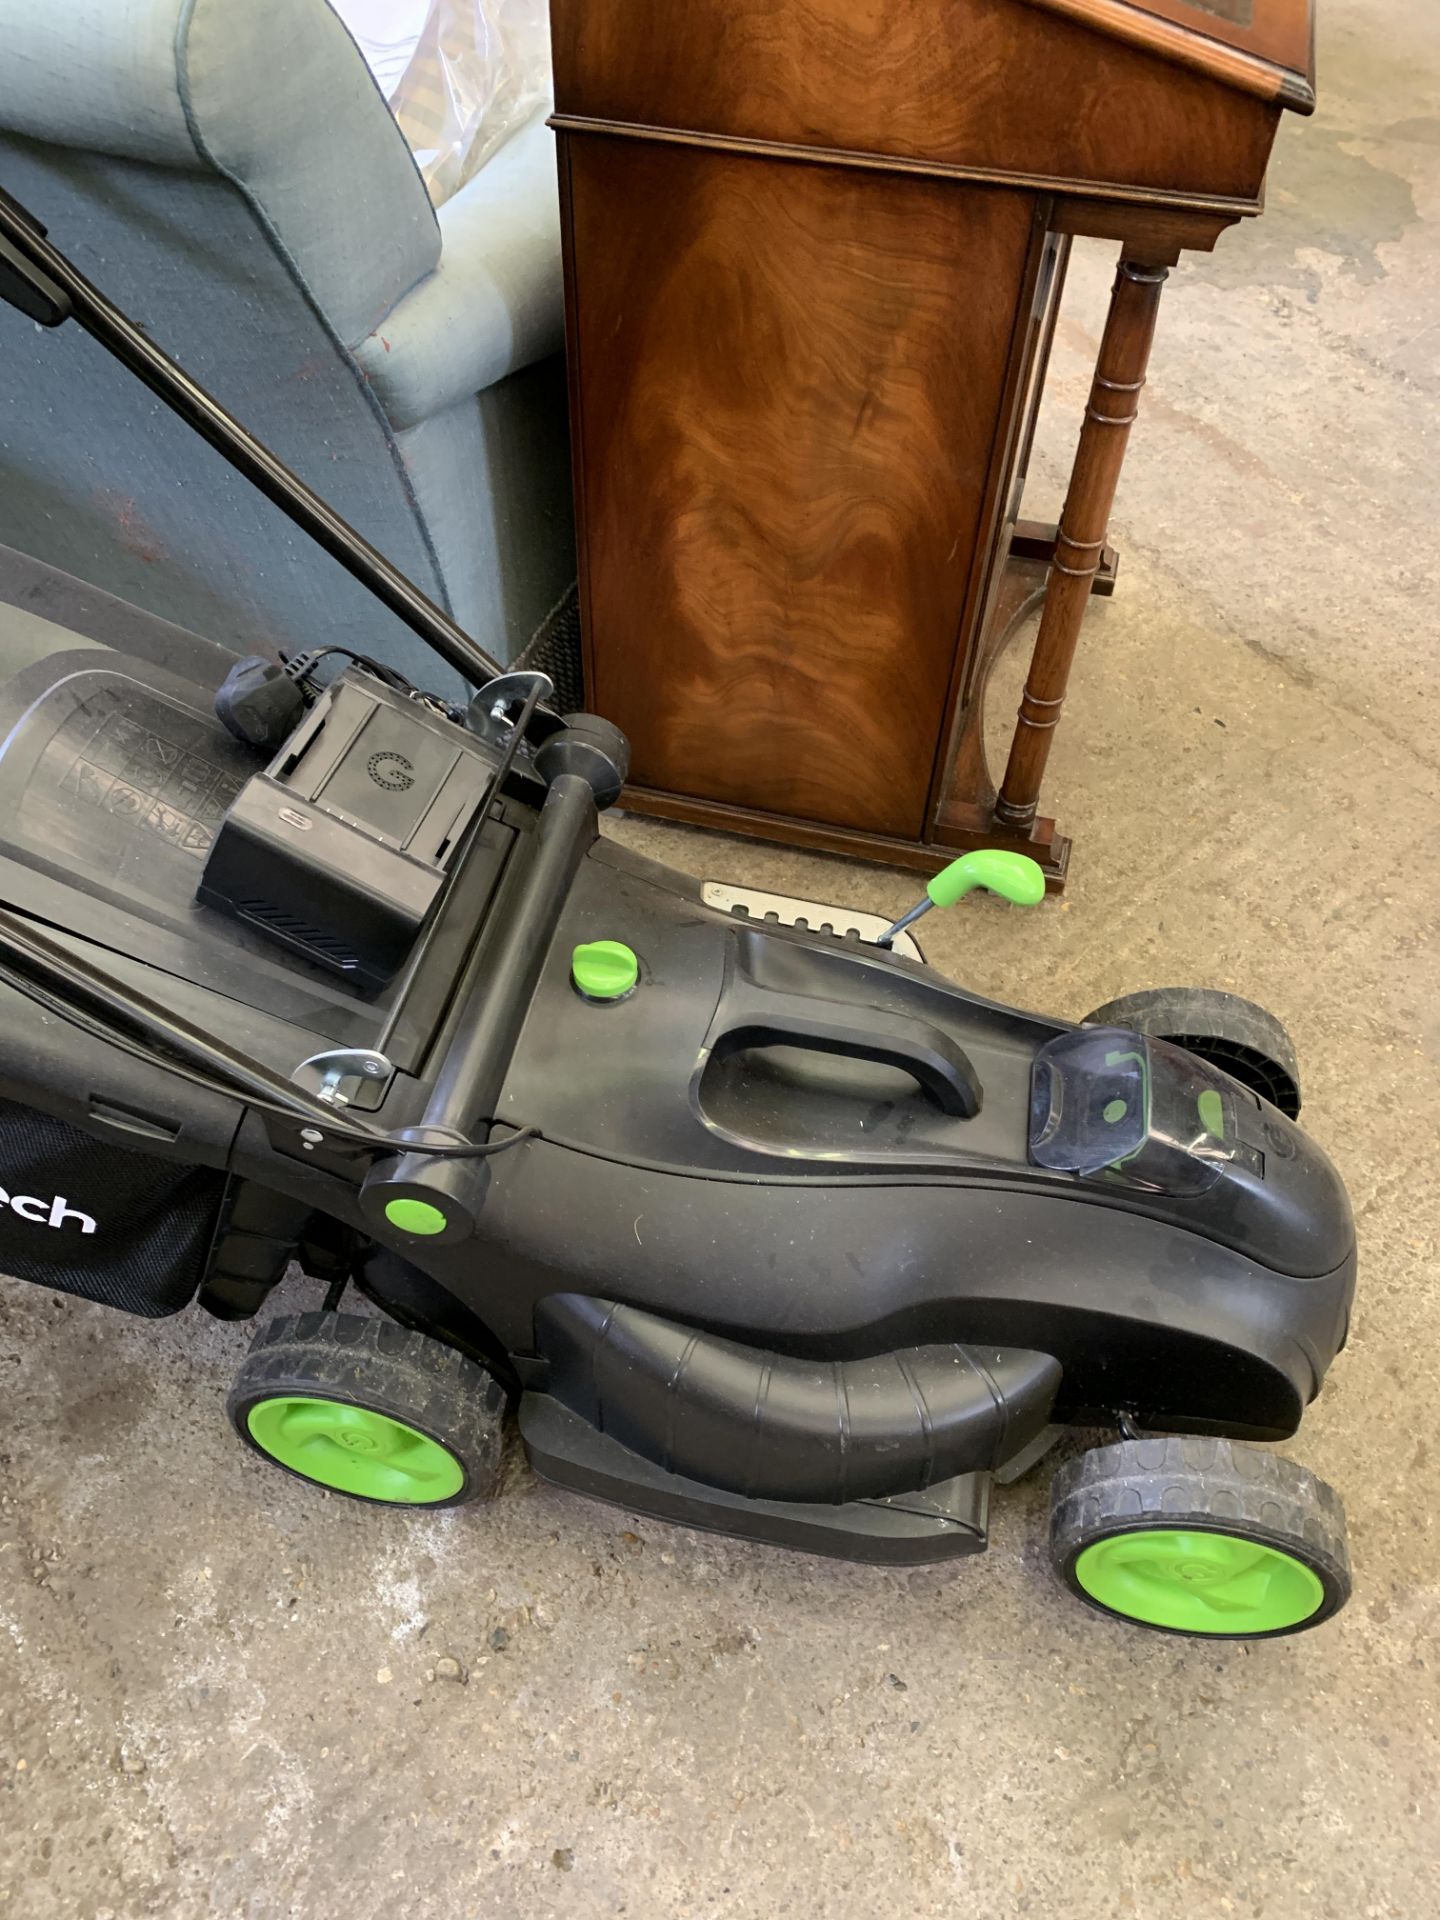 Gtech CLM021 43cm Cordless Rotary Lawnmower - 48V - Image 4 of 4